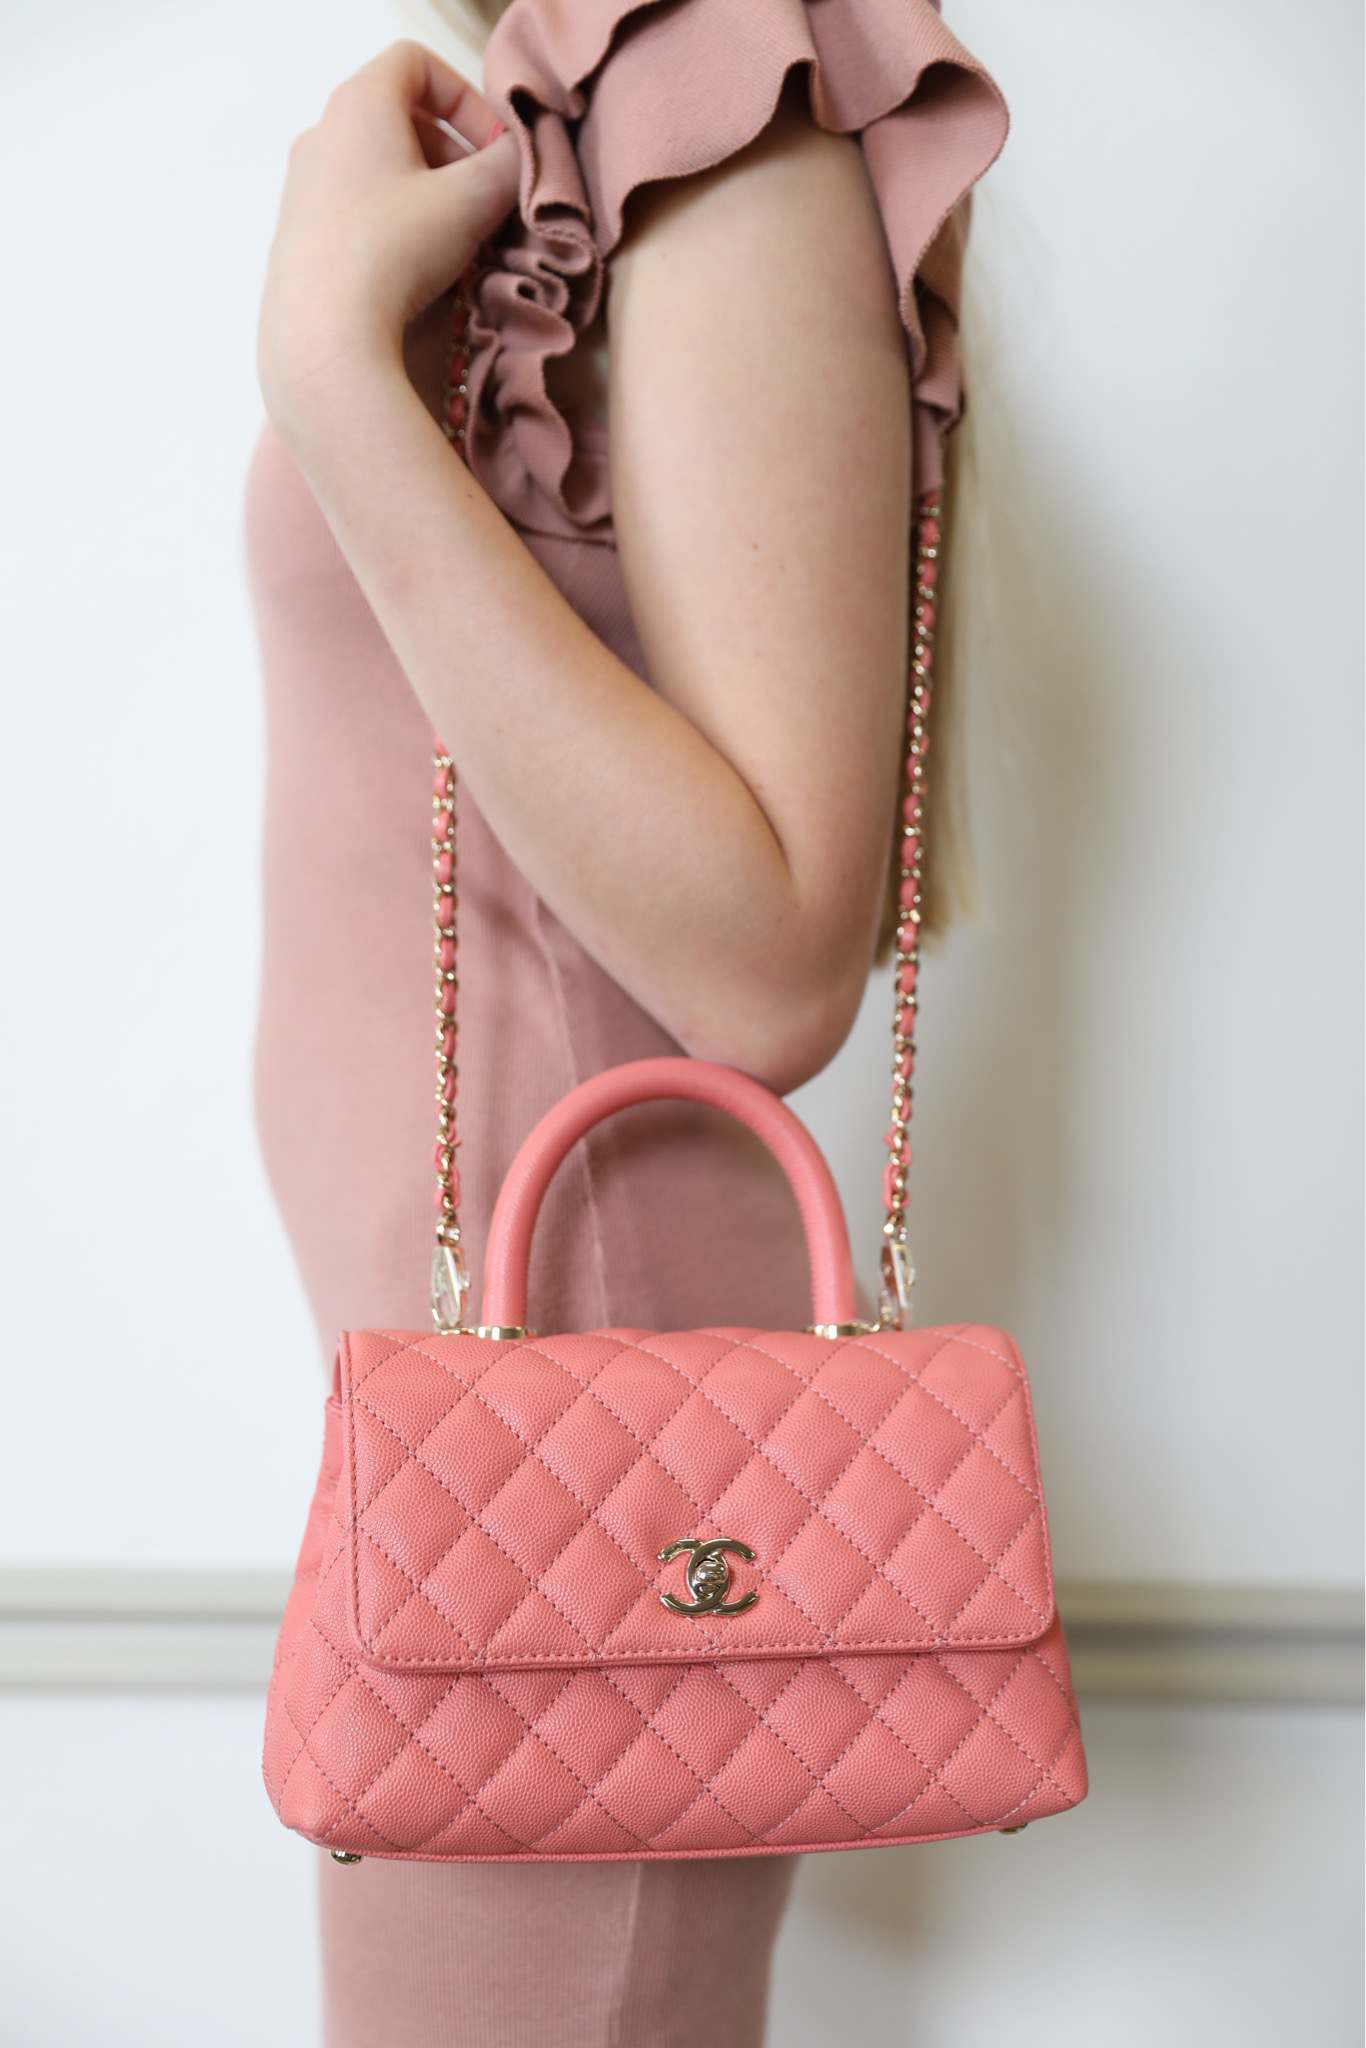 Chanel Business Affinity Medium, Coral Pink Caviar with Gold Hardware,  Preowned in Box WA001 - Julia Rose Boston